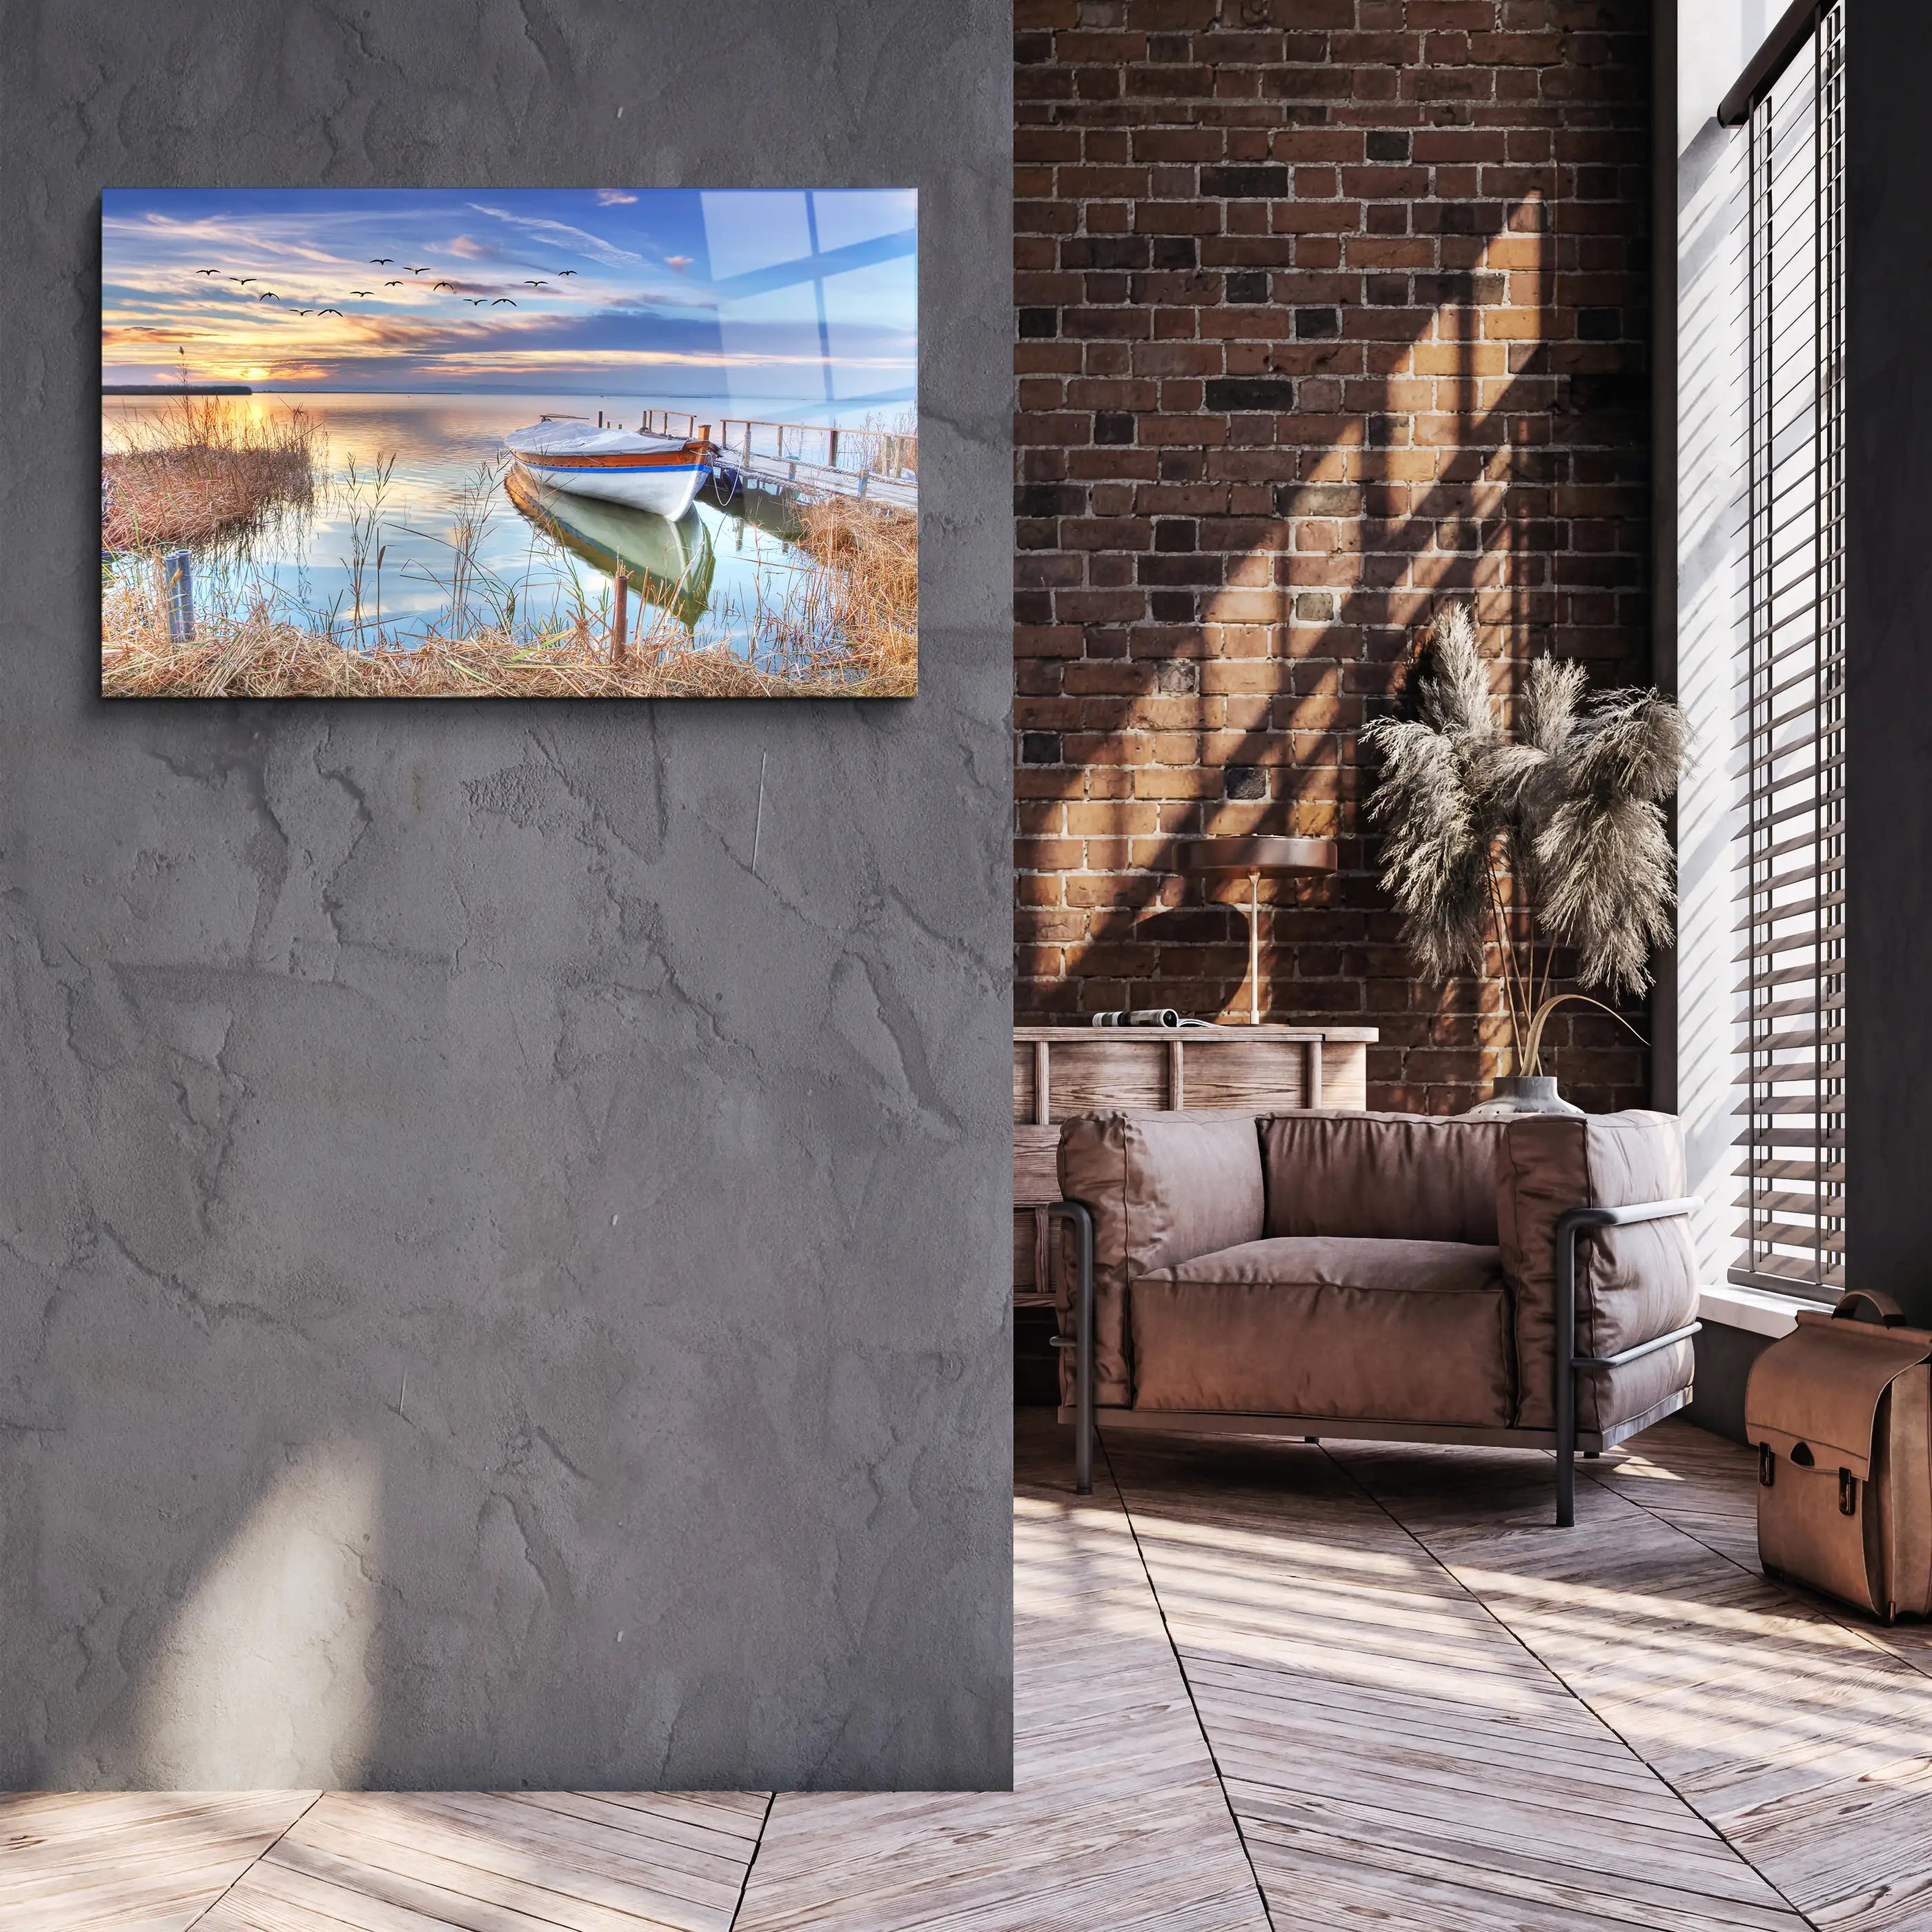 Boat on The Shore Glass Wall Art, Picture Made of Glass